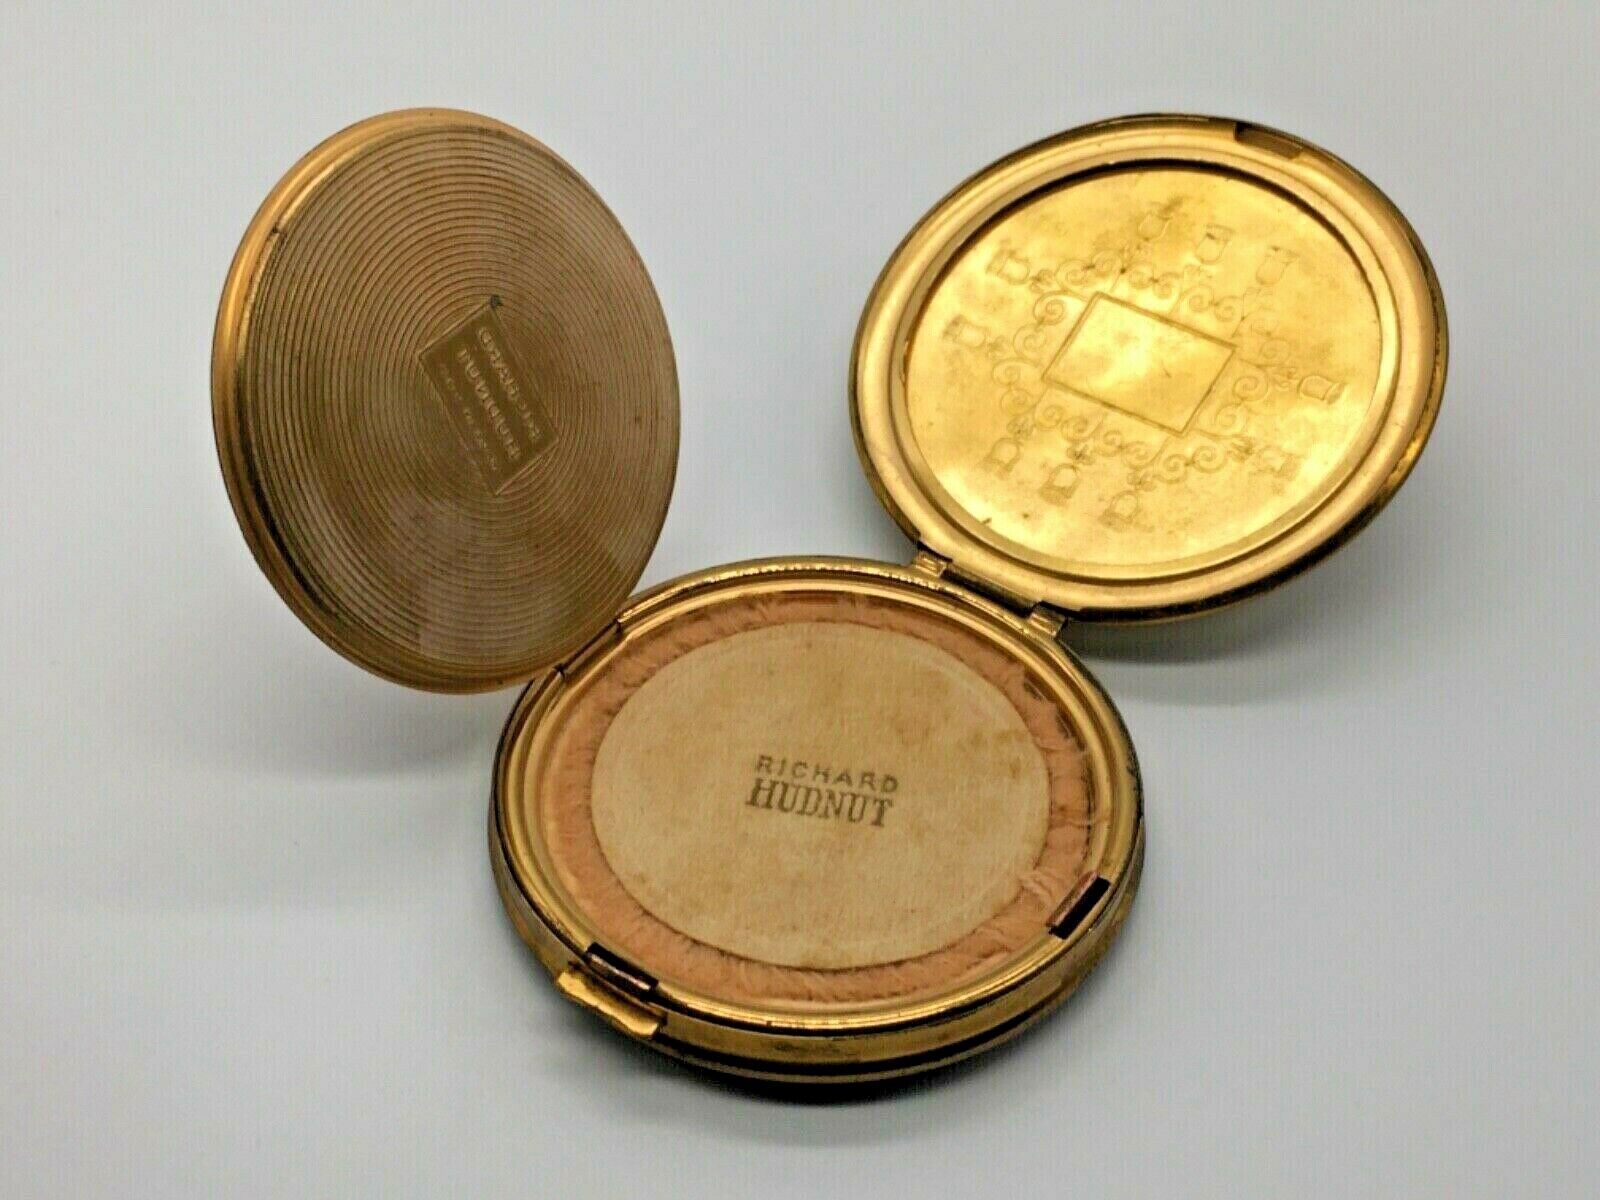 Vintage Art-deco Richard Hudnut Compact With Puff